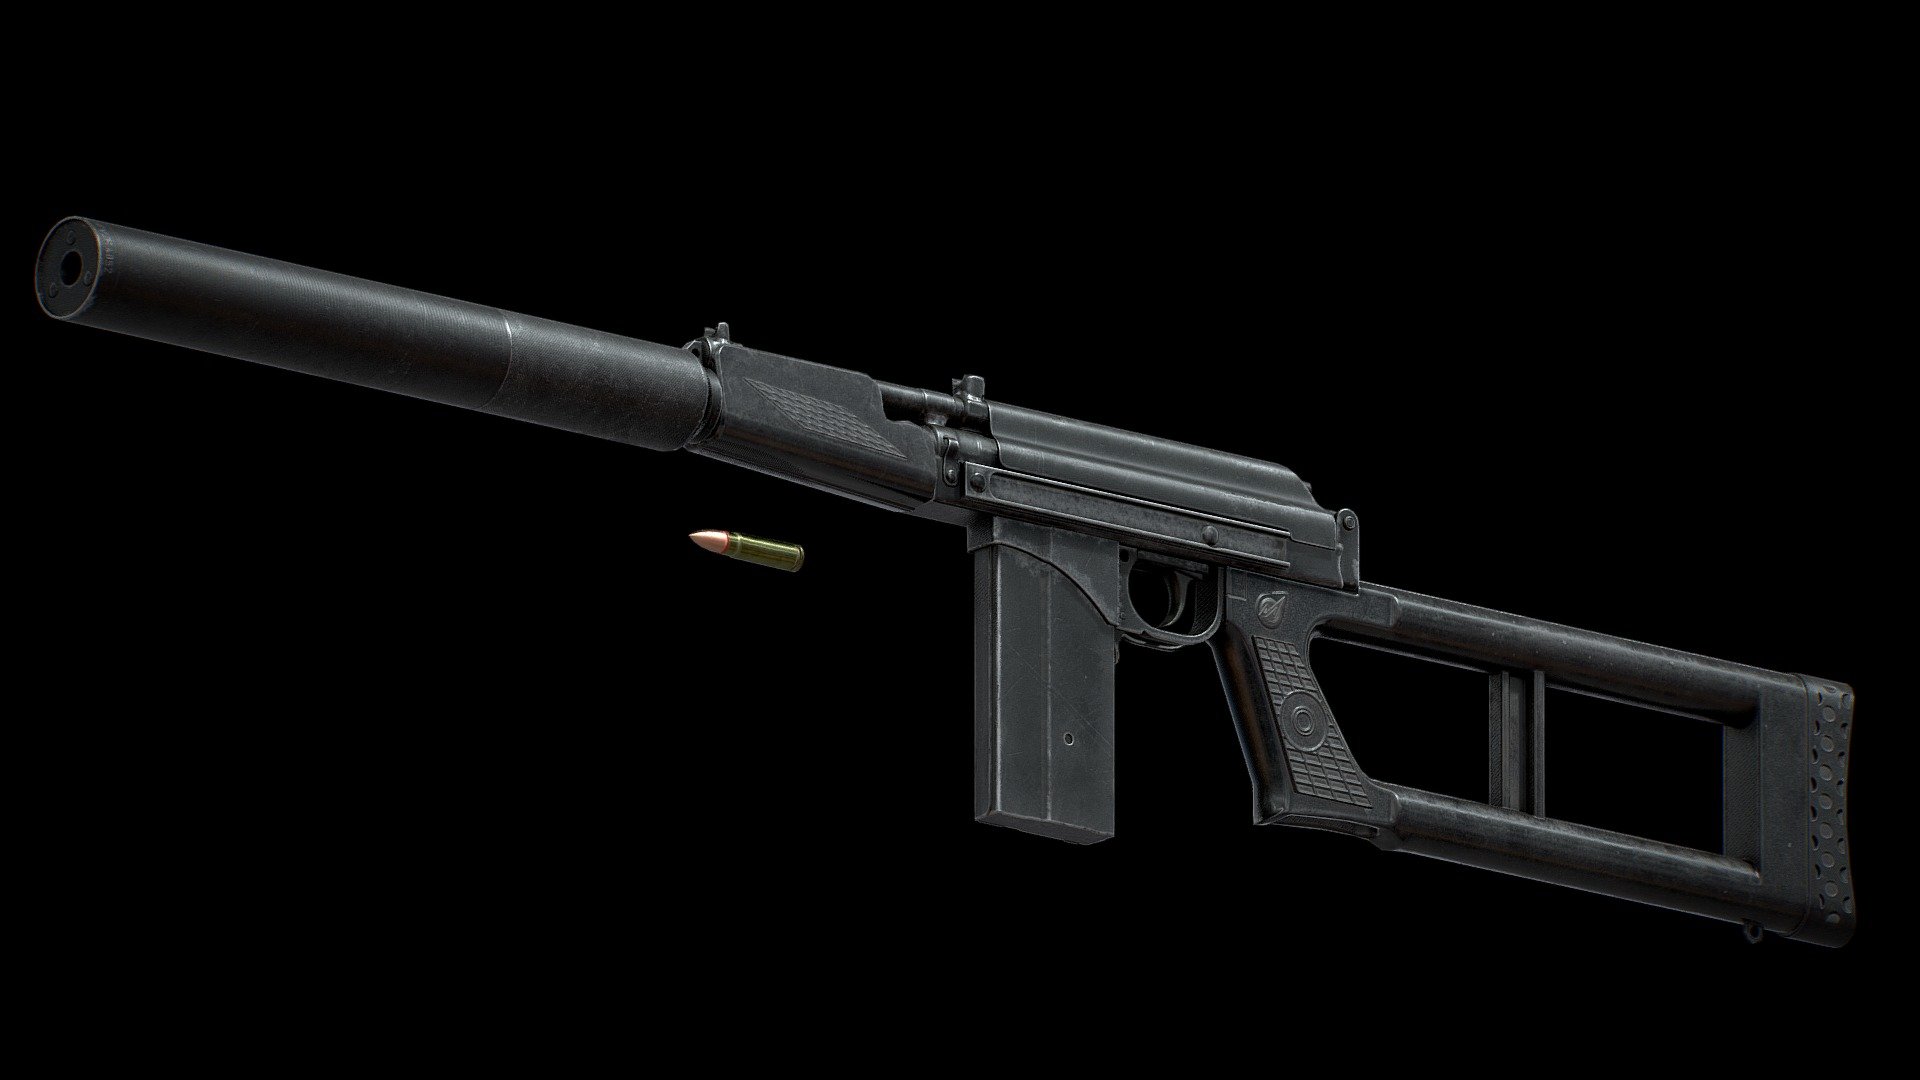 This model is free, so please consider liking it. Subscribe for more models like this one!

Some history:



The VSK-94 is a 9x39mm suppressed designated marksman rifle designed in 1995 in the KBP Instrument Design Bureau by Vasily Gryazev 3d model